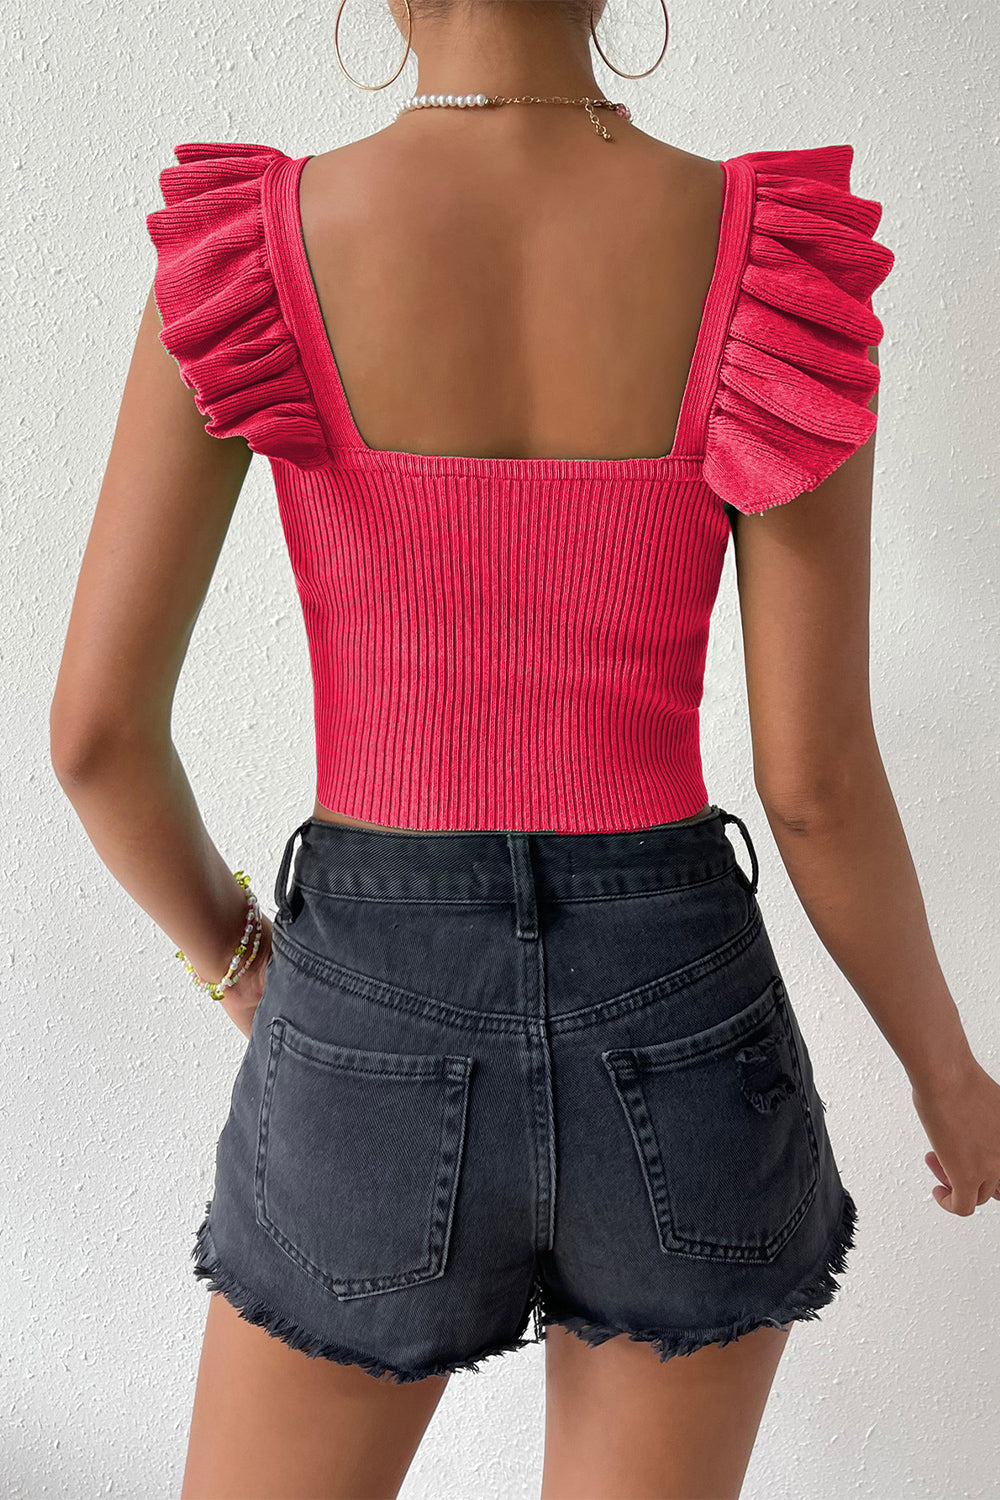 Square Neck Tie Front Knit Top